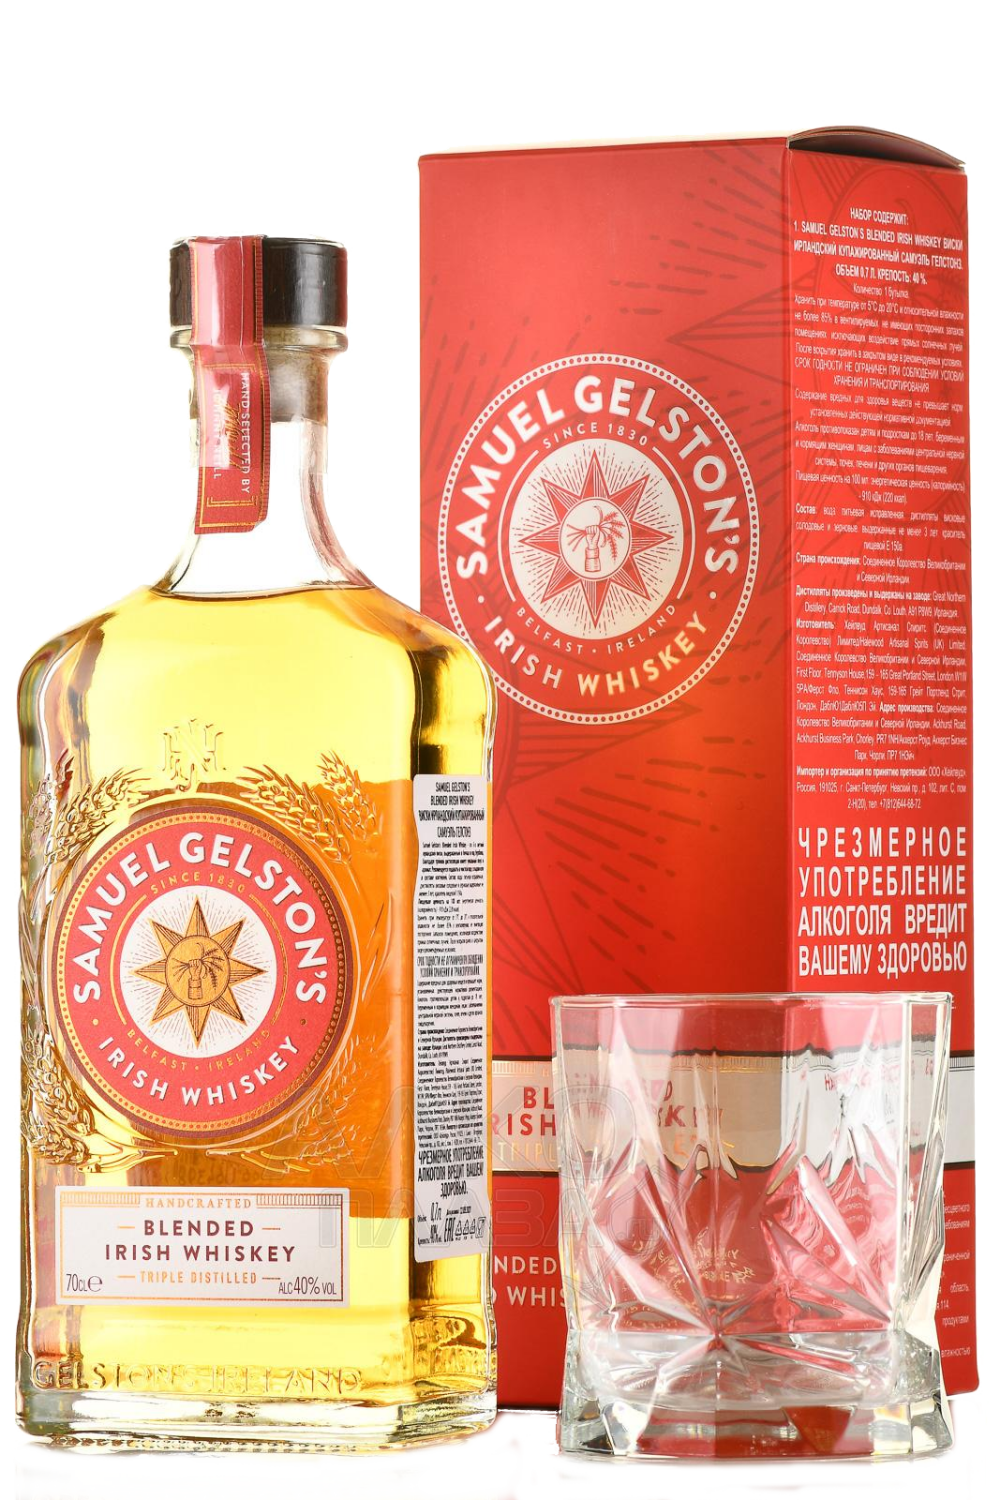 Gelston's Blended Irish Whisky (gift box with glass) clan macgregor blended scotch whisky gift box with a glass